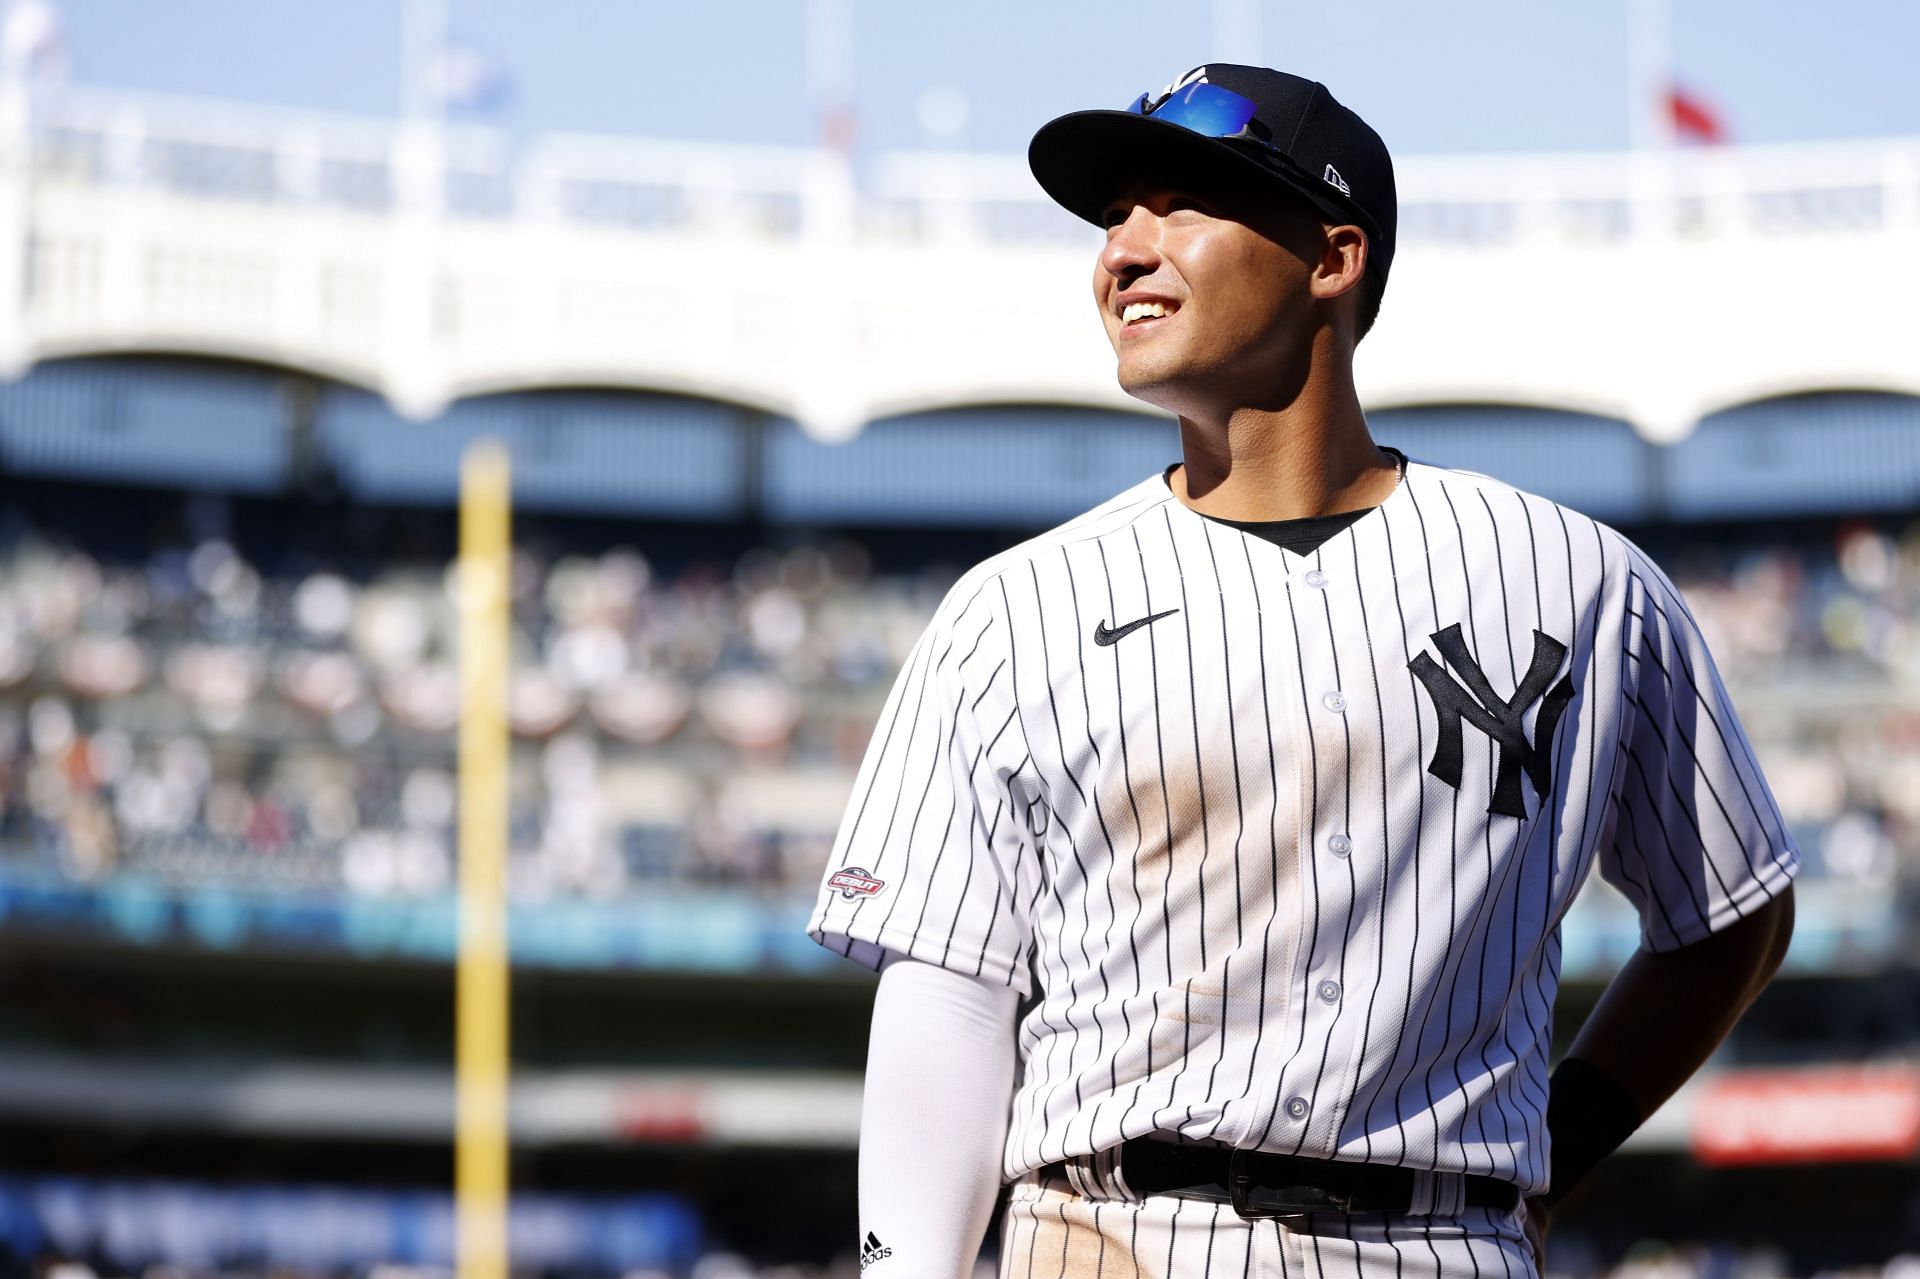 Is Anthony Volpe the Next Derek Jeter? We Asked MLB The Show 23 